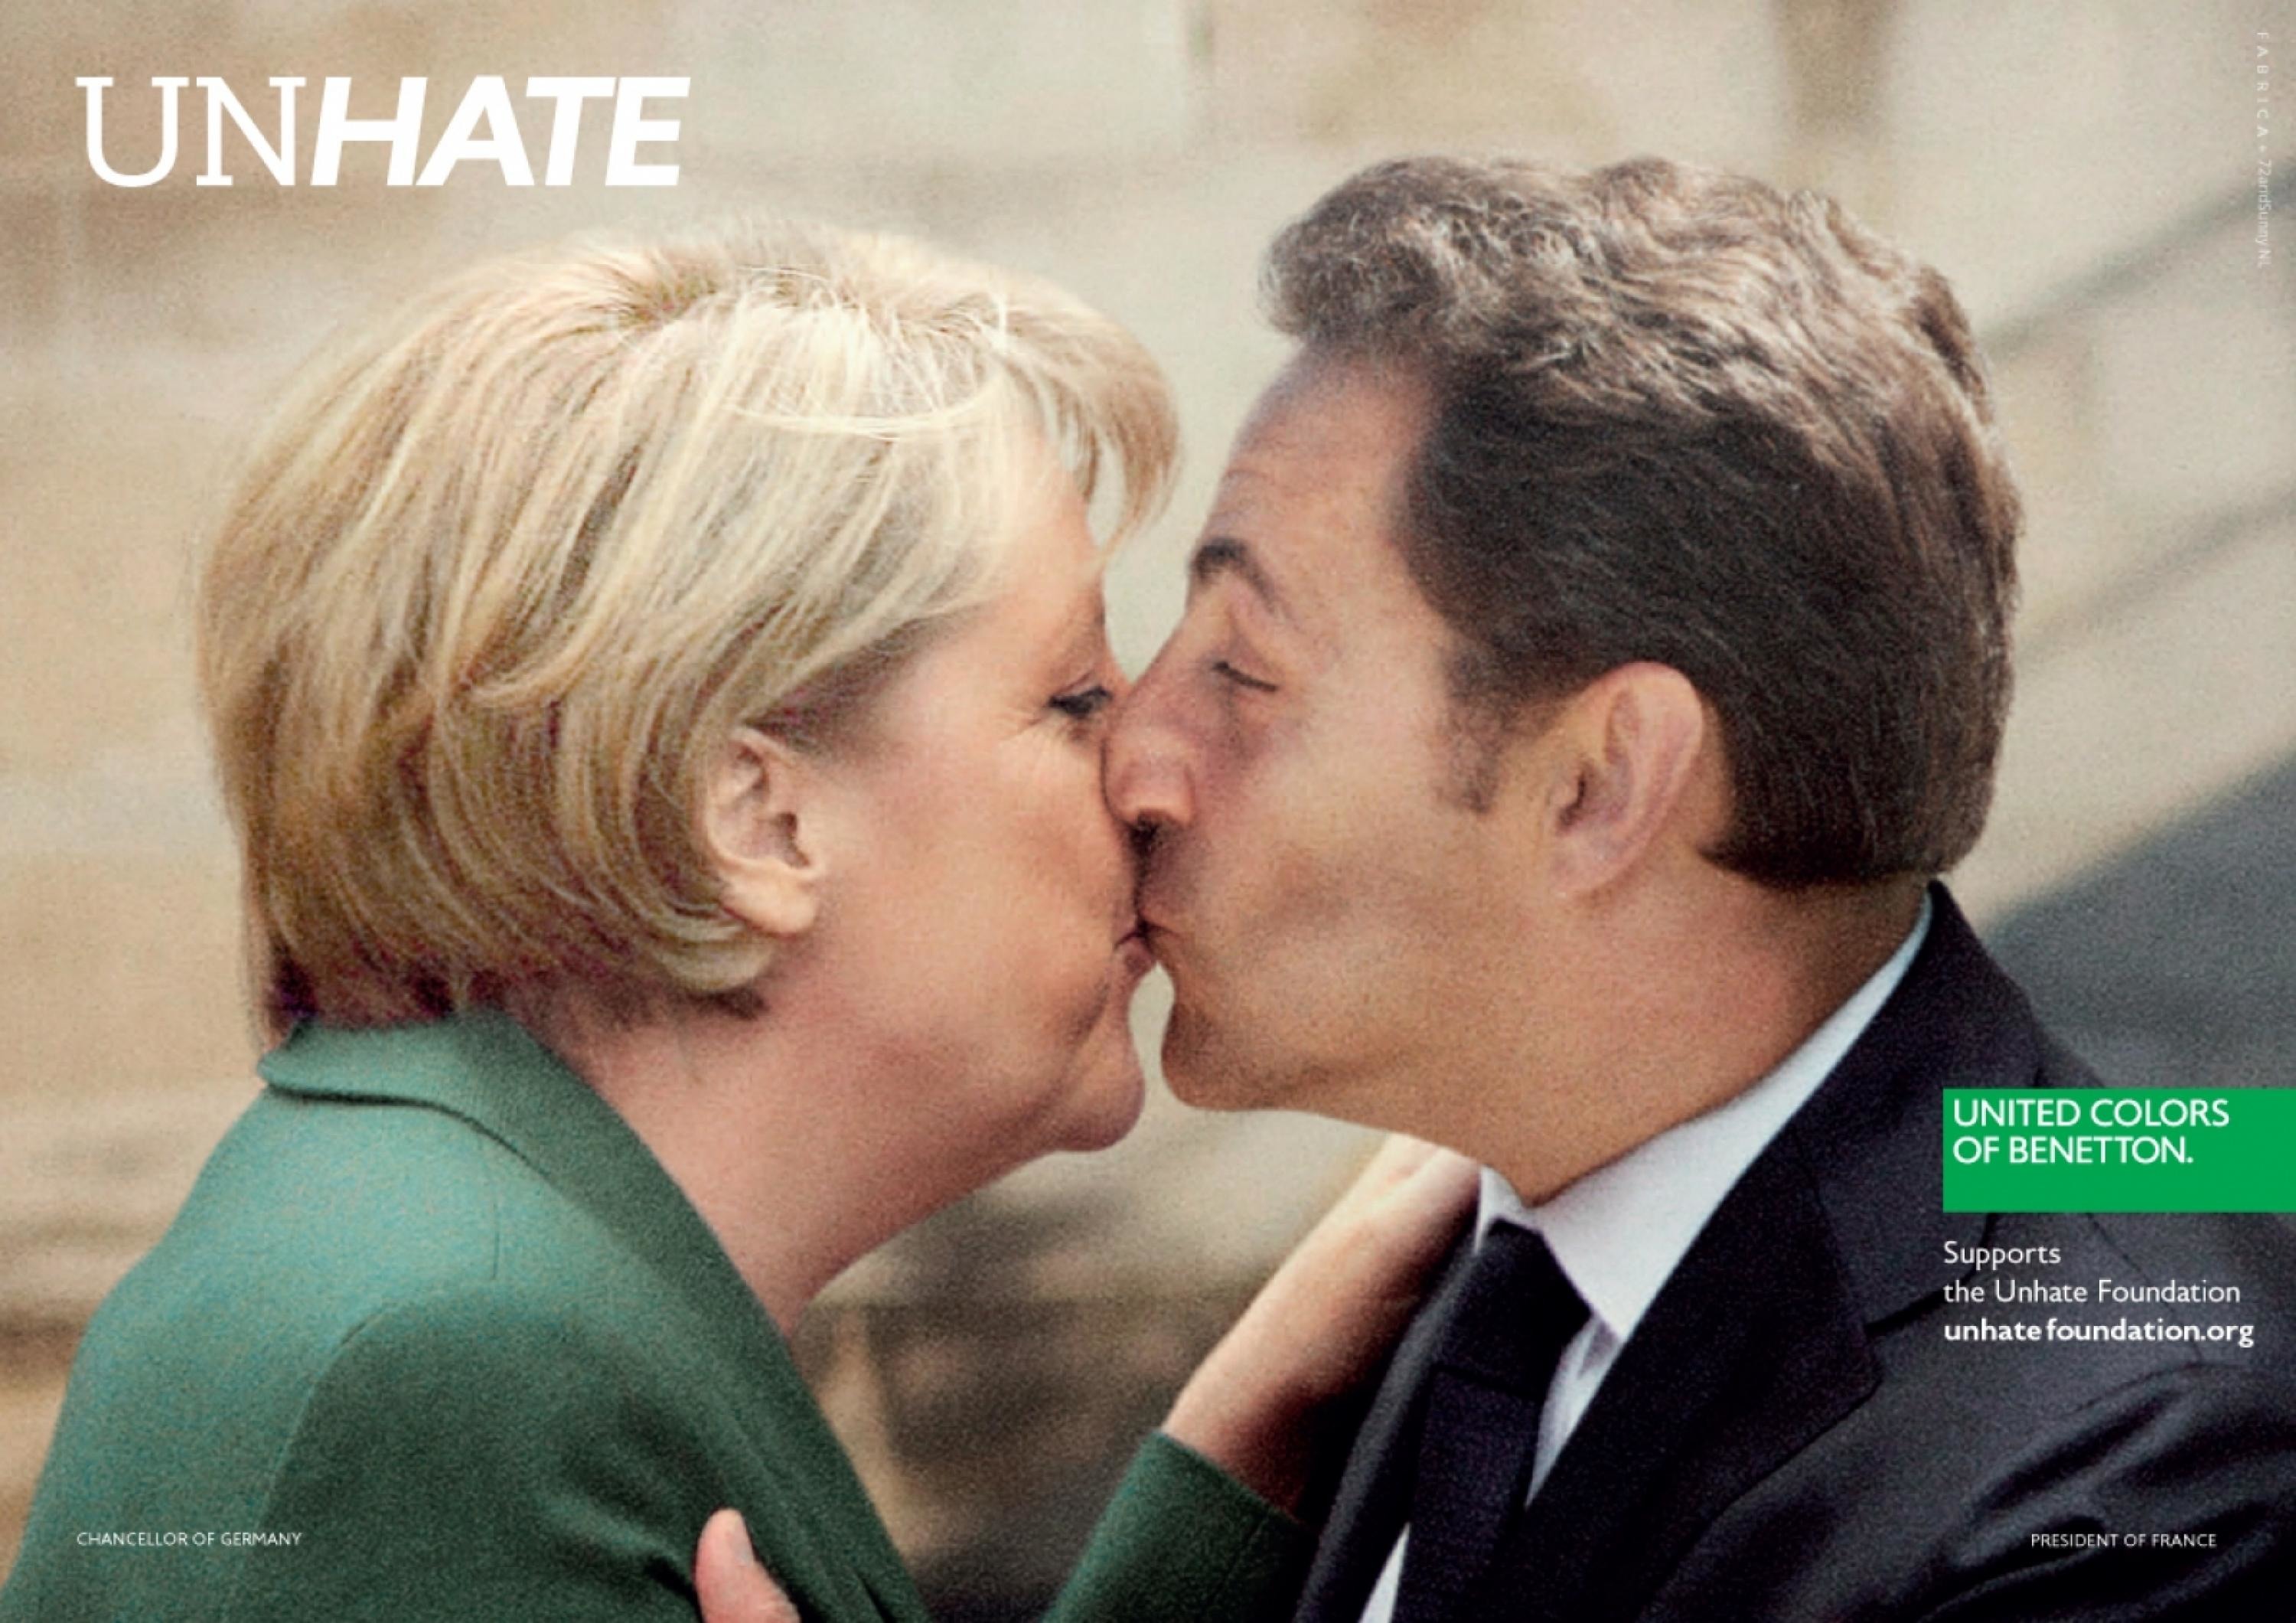 UNHATE (GERMANY AND FRANCE)